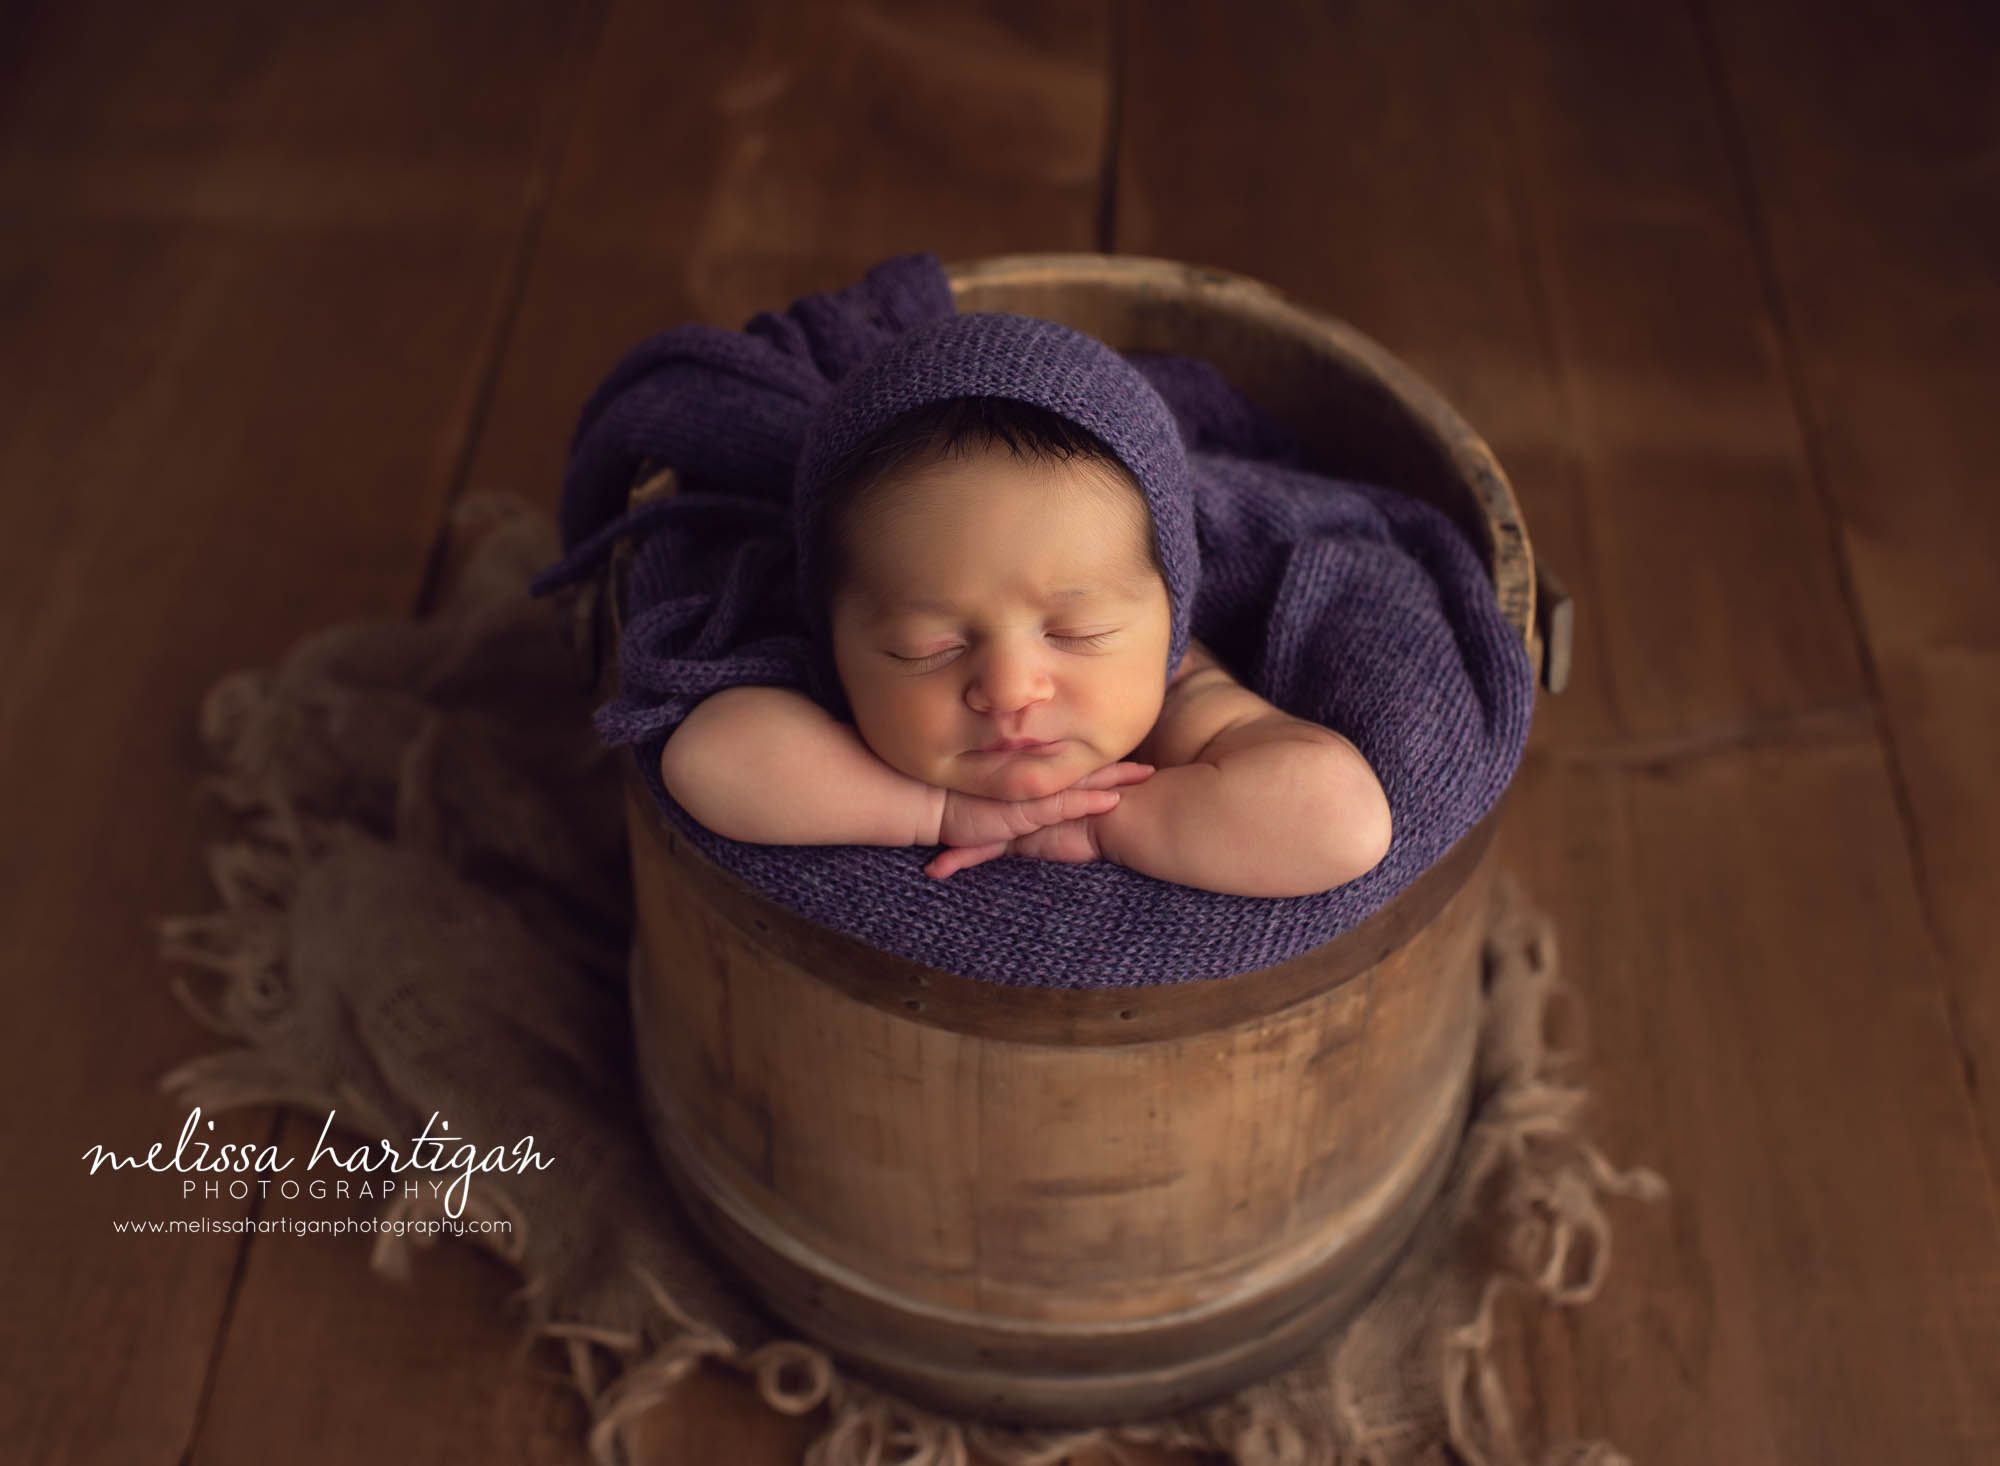 Baby girl posed in rustic bucket with purple knitted bonnet and purple wrap Ct newborn Photographer